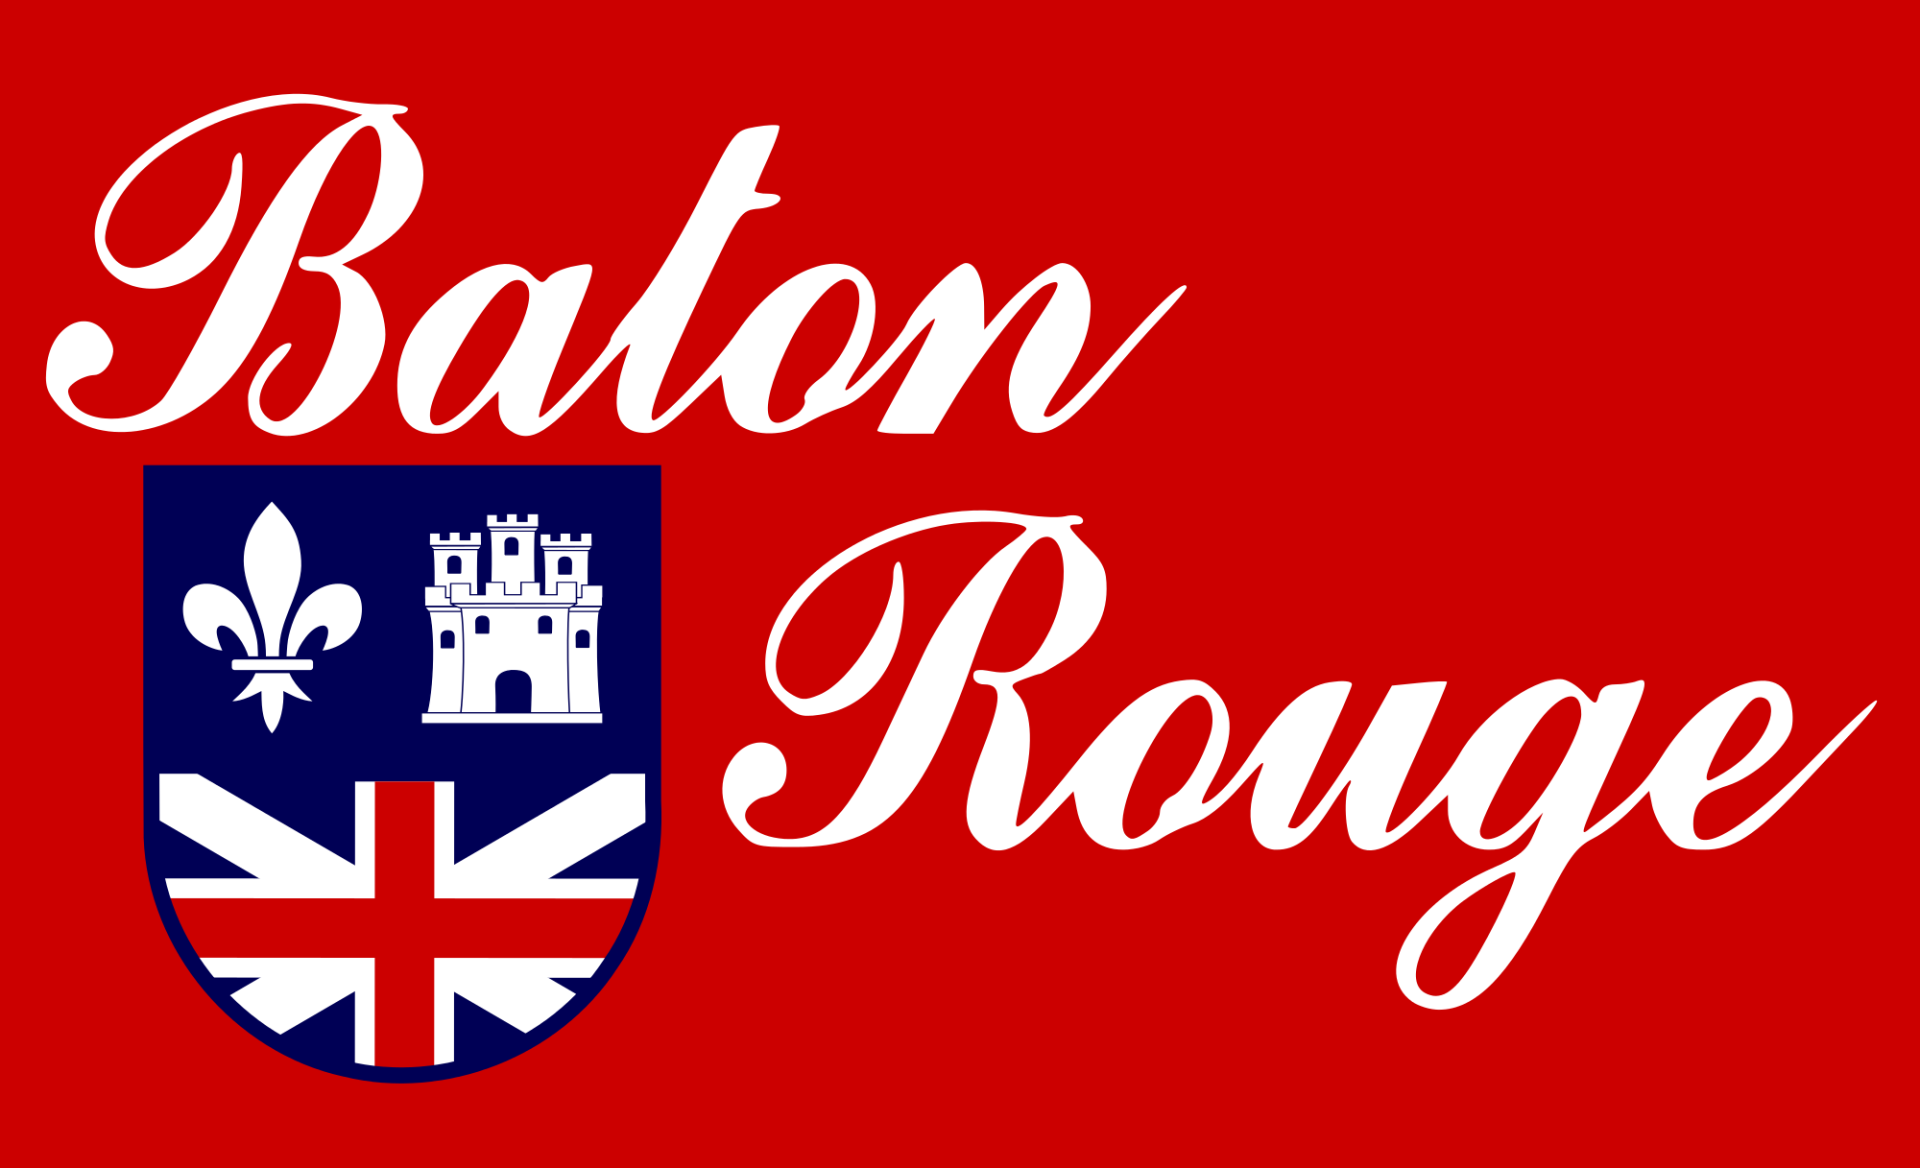 Flag of Baton Rouge HD Wallpaper and Background Image